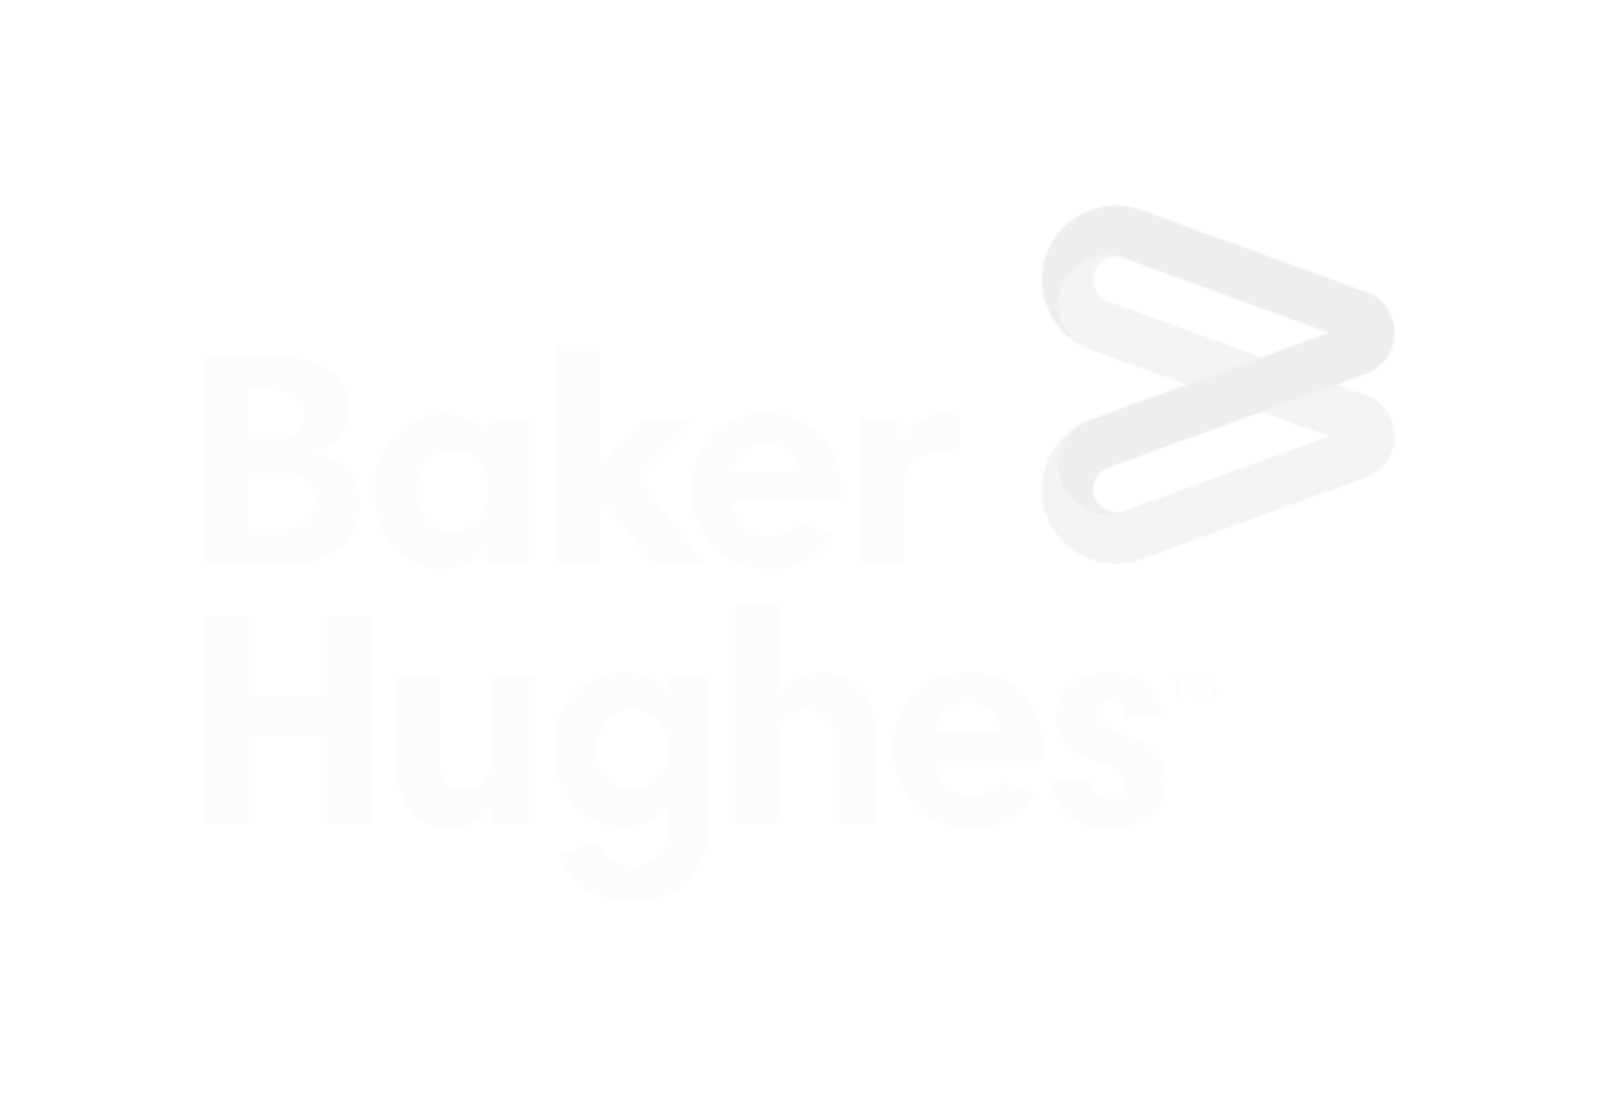 Baker Hughes supporting member of PAGE